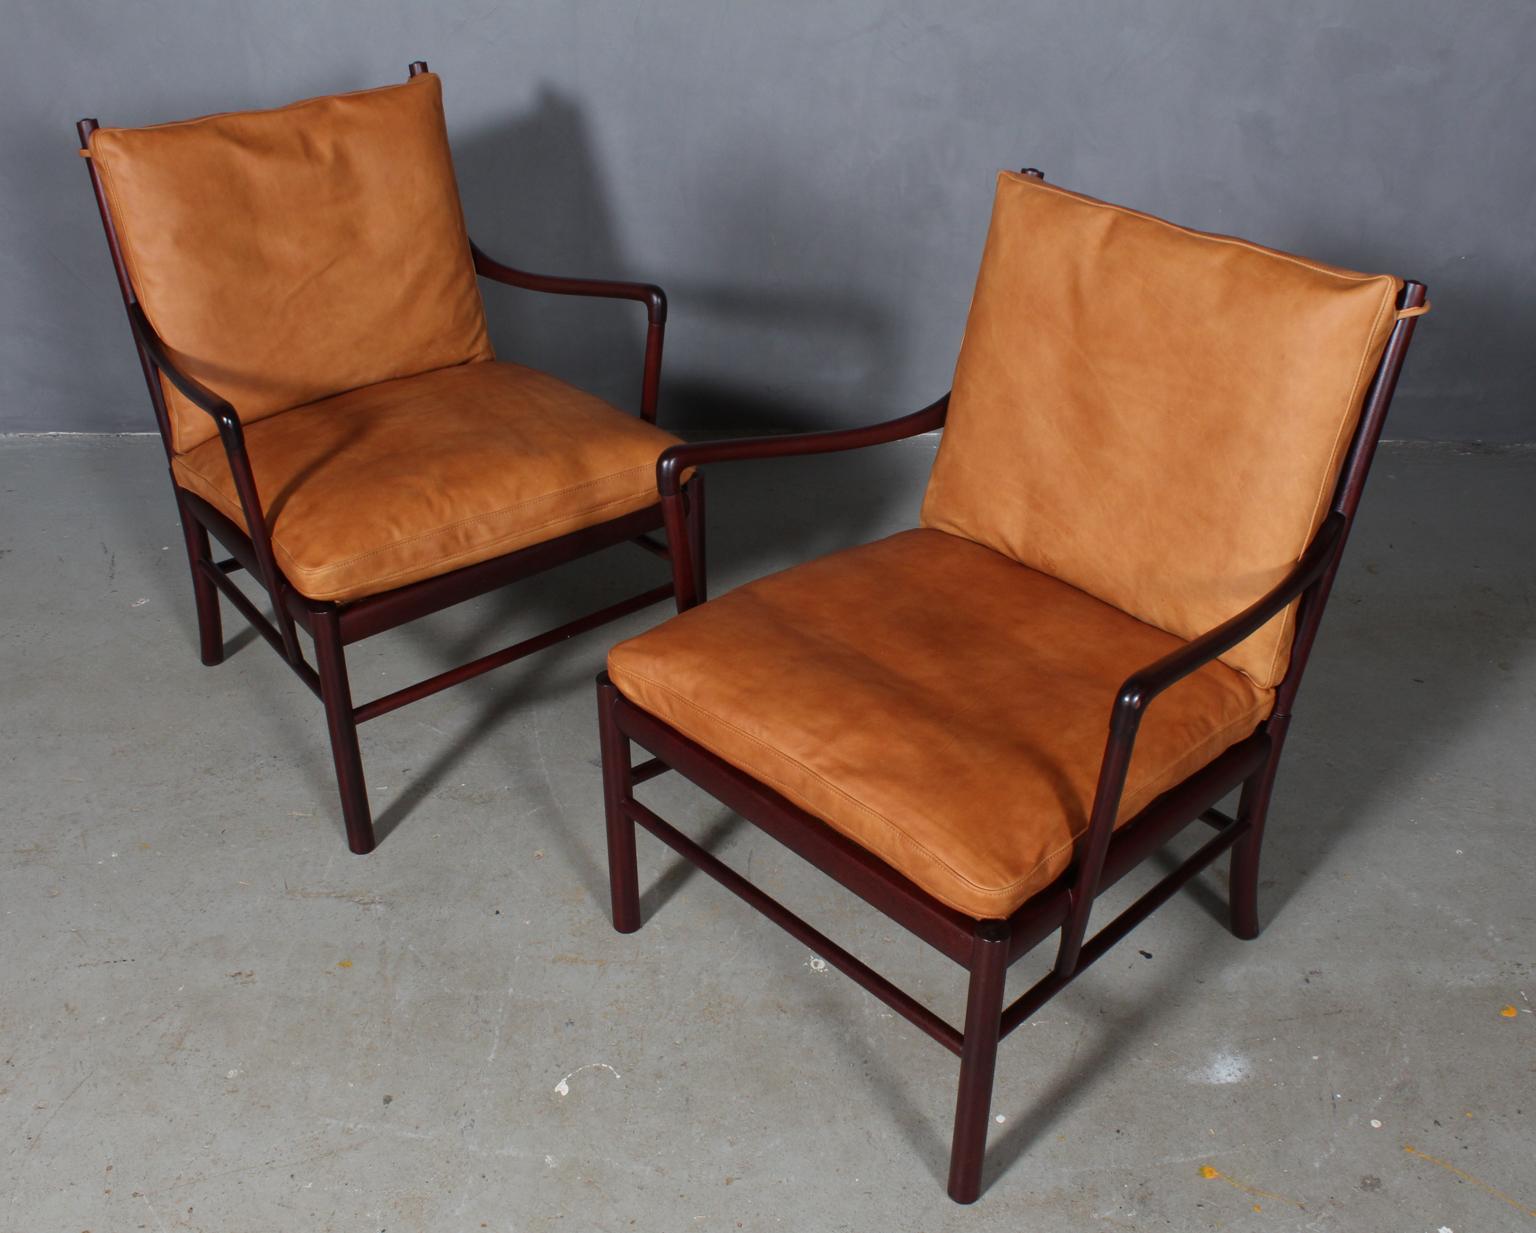 Ole Wanscher lounge chairs new upholstered with vintage aniline leather.

Made in mahogany.

Model PJ 149 colonial chair, made by Poul Jeppesen.